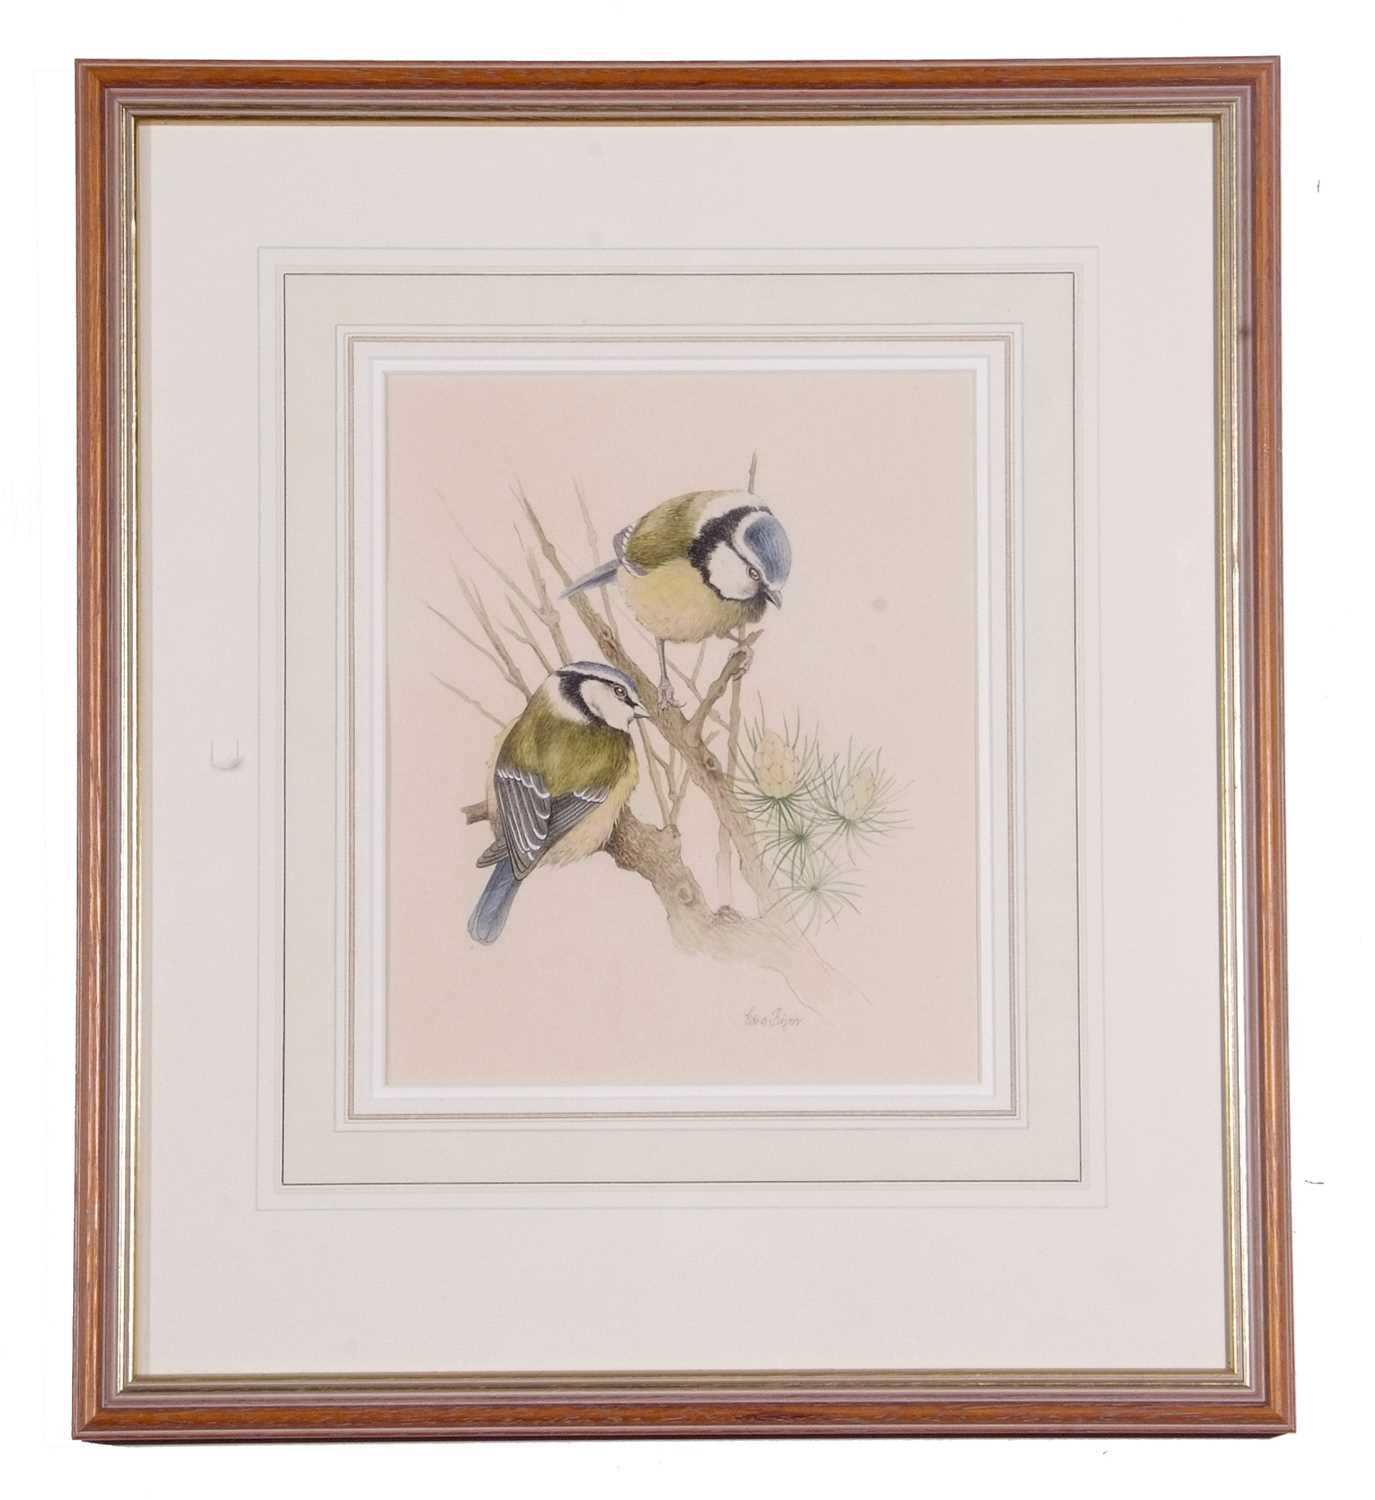 Edna Bizon (British, 20th century) Two great tits on a branch, watercolour, signed 10x11ins,